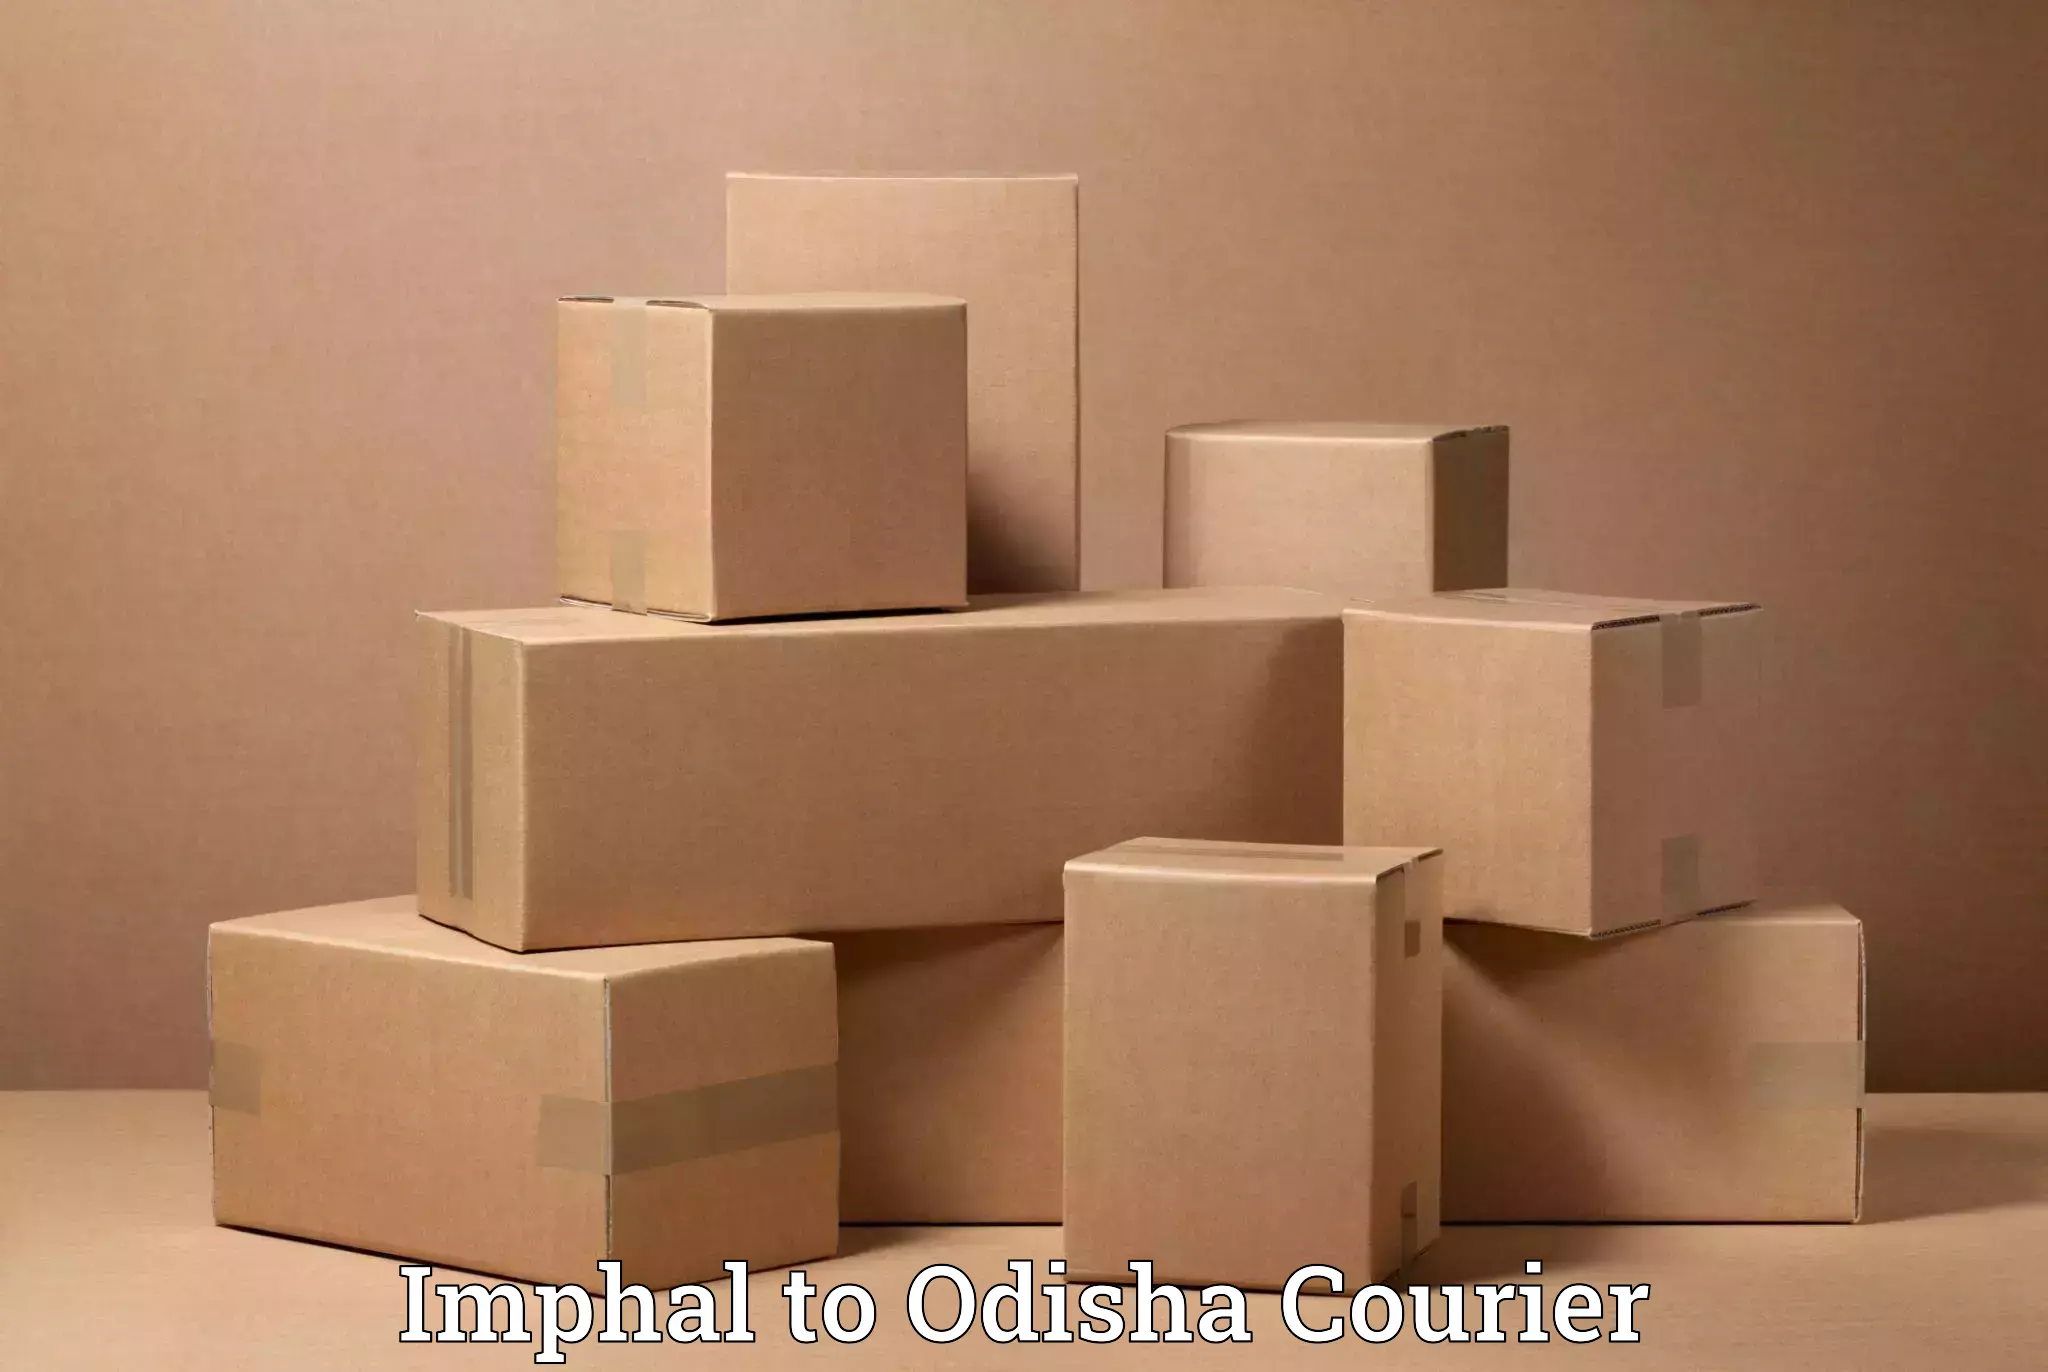 Efficient relocation services Imphal to Bhubaneswar